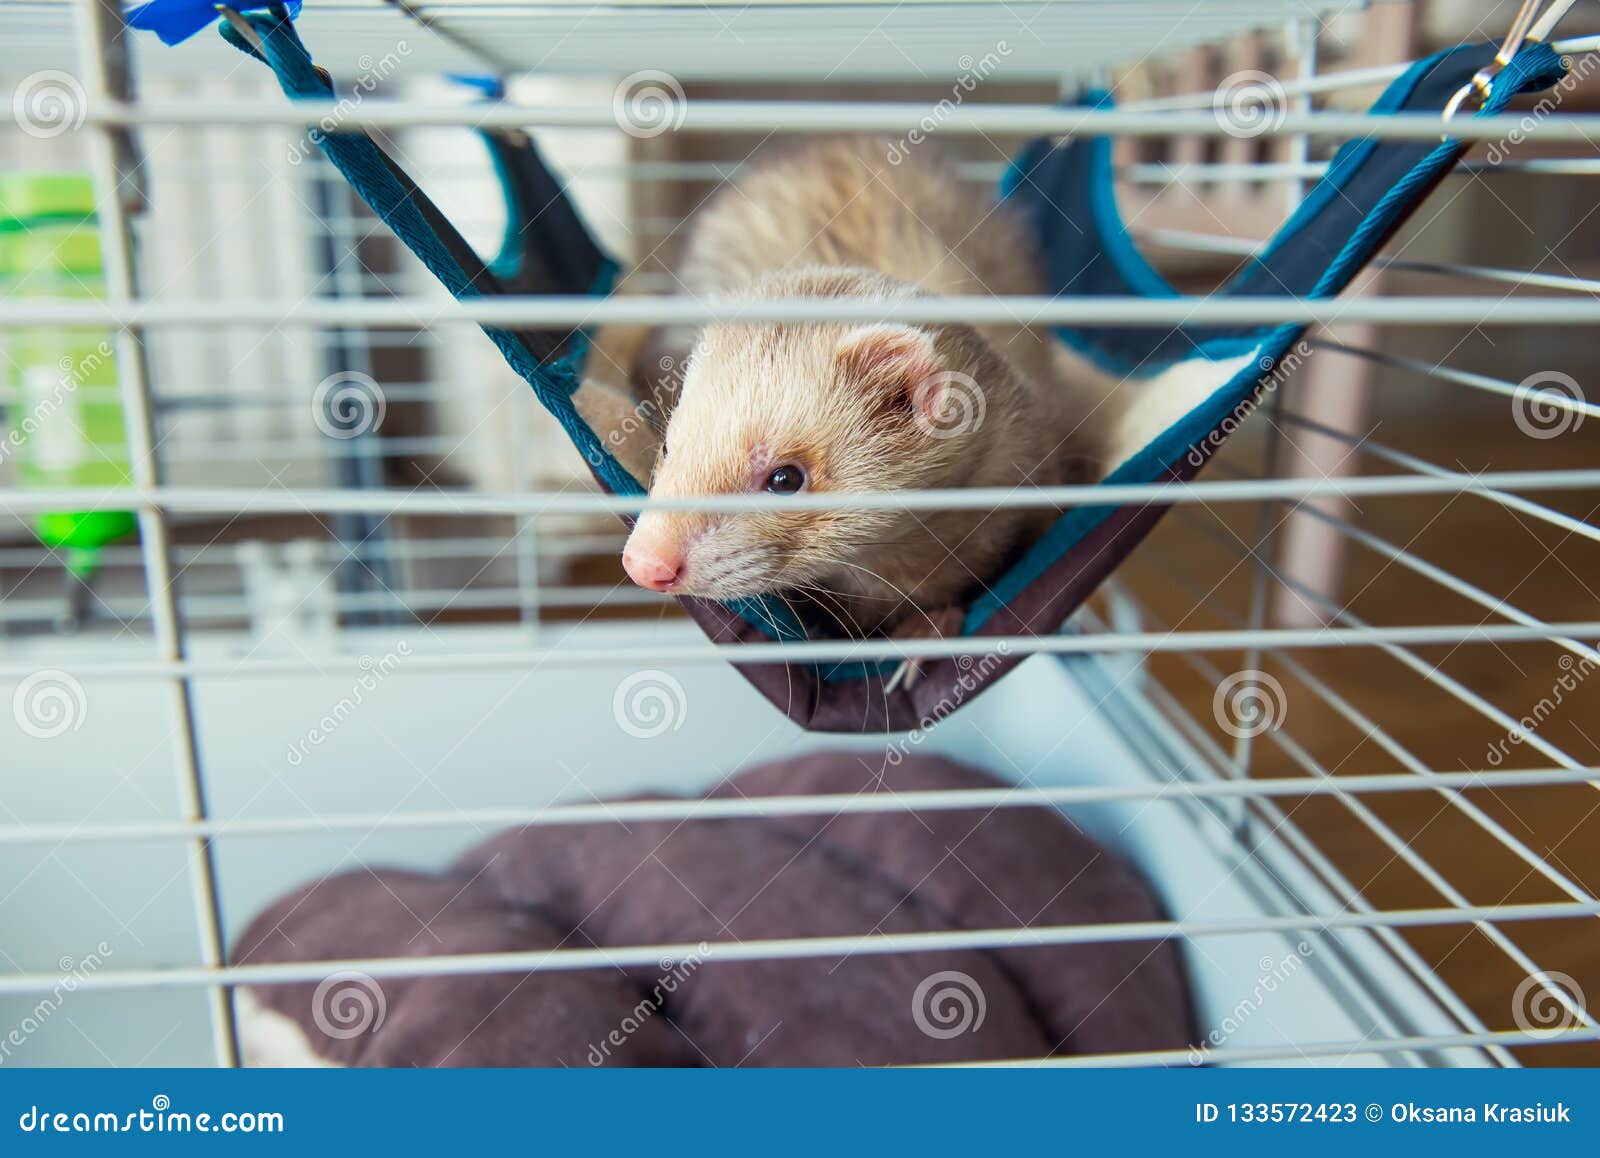 beige ferret resting in his cage. home pet concept. view through grid. selective focus. copy space